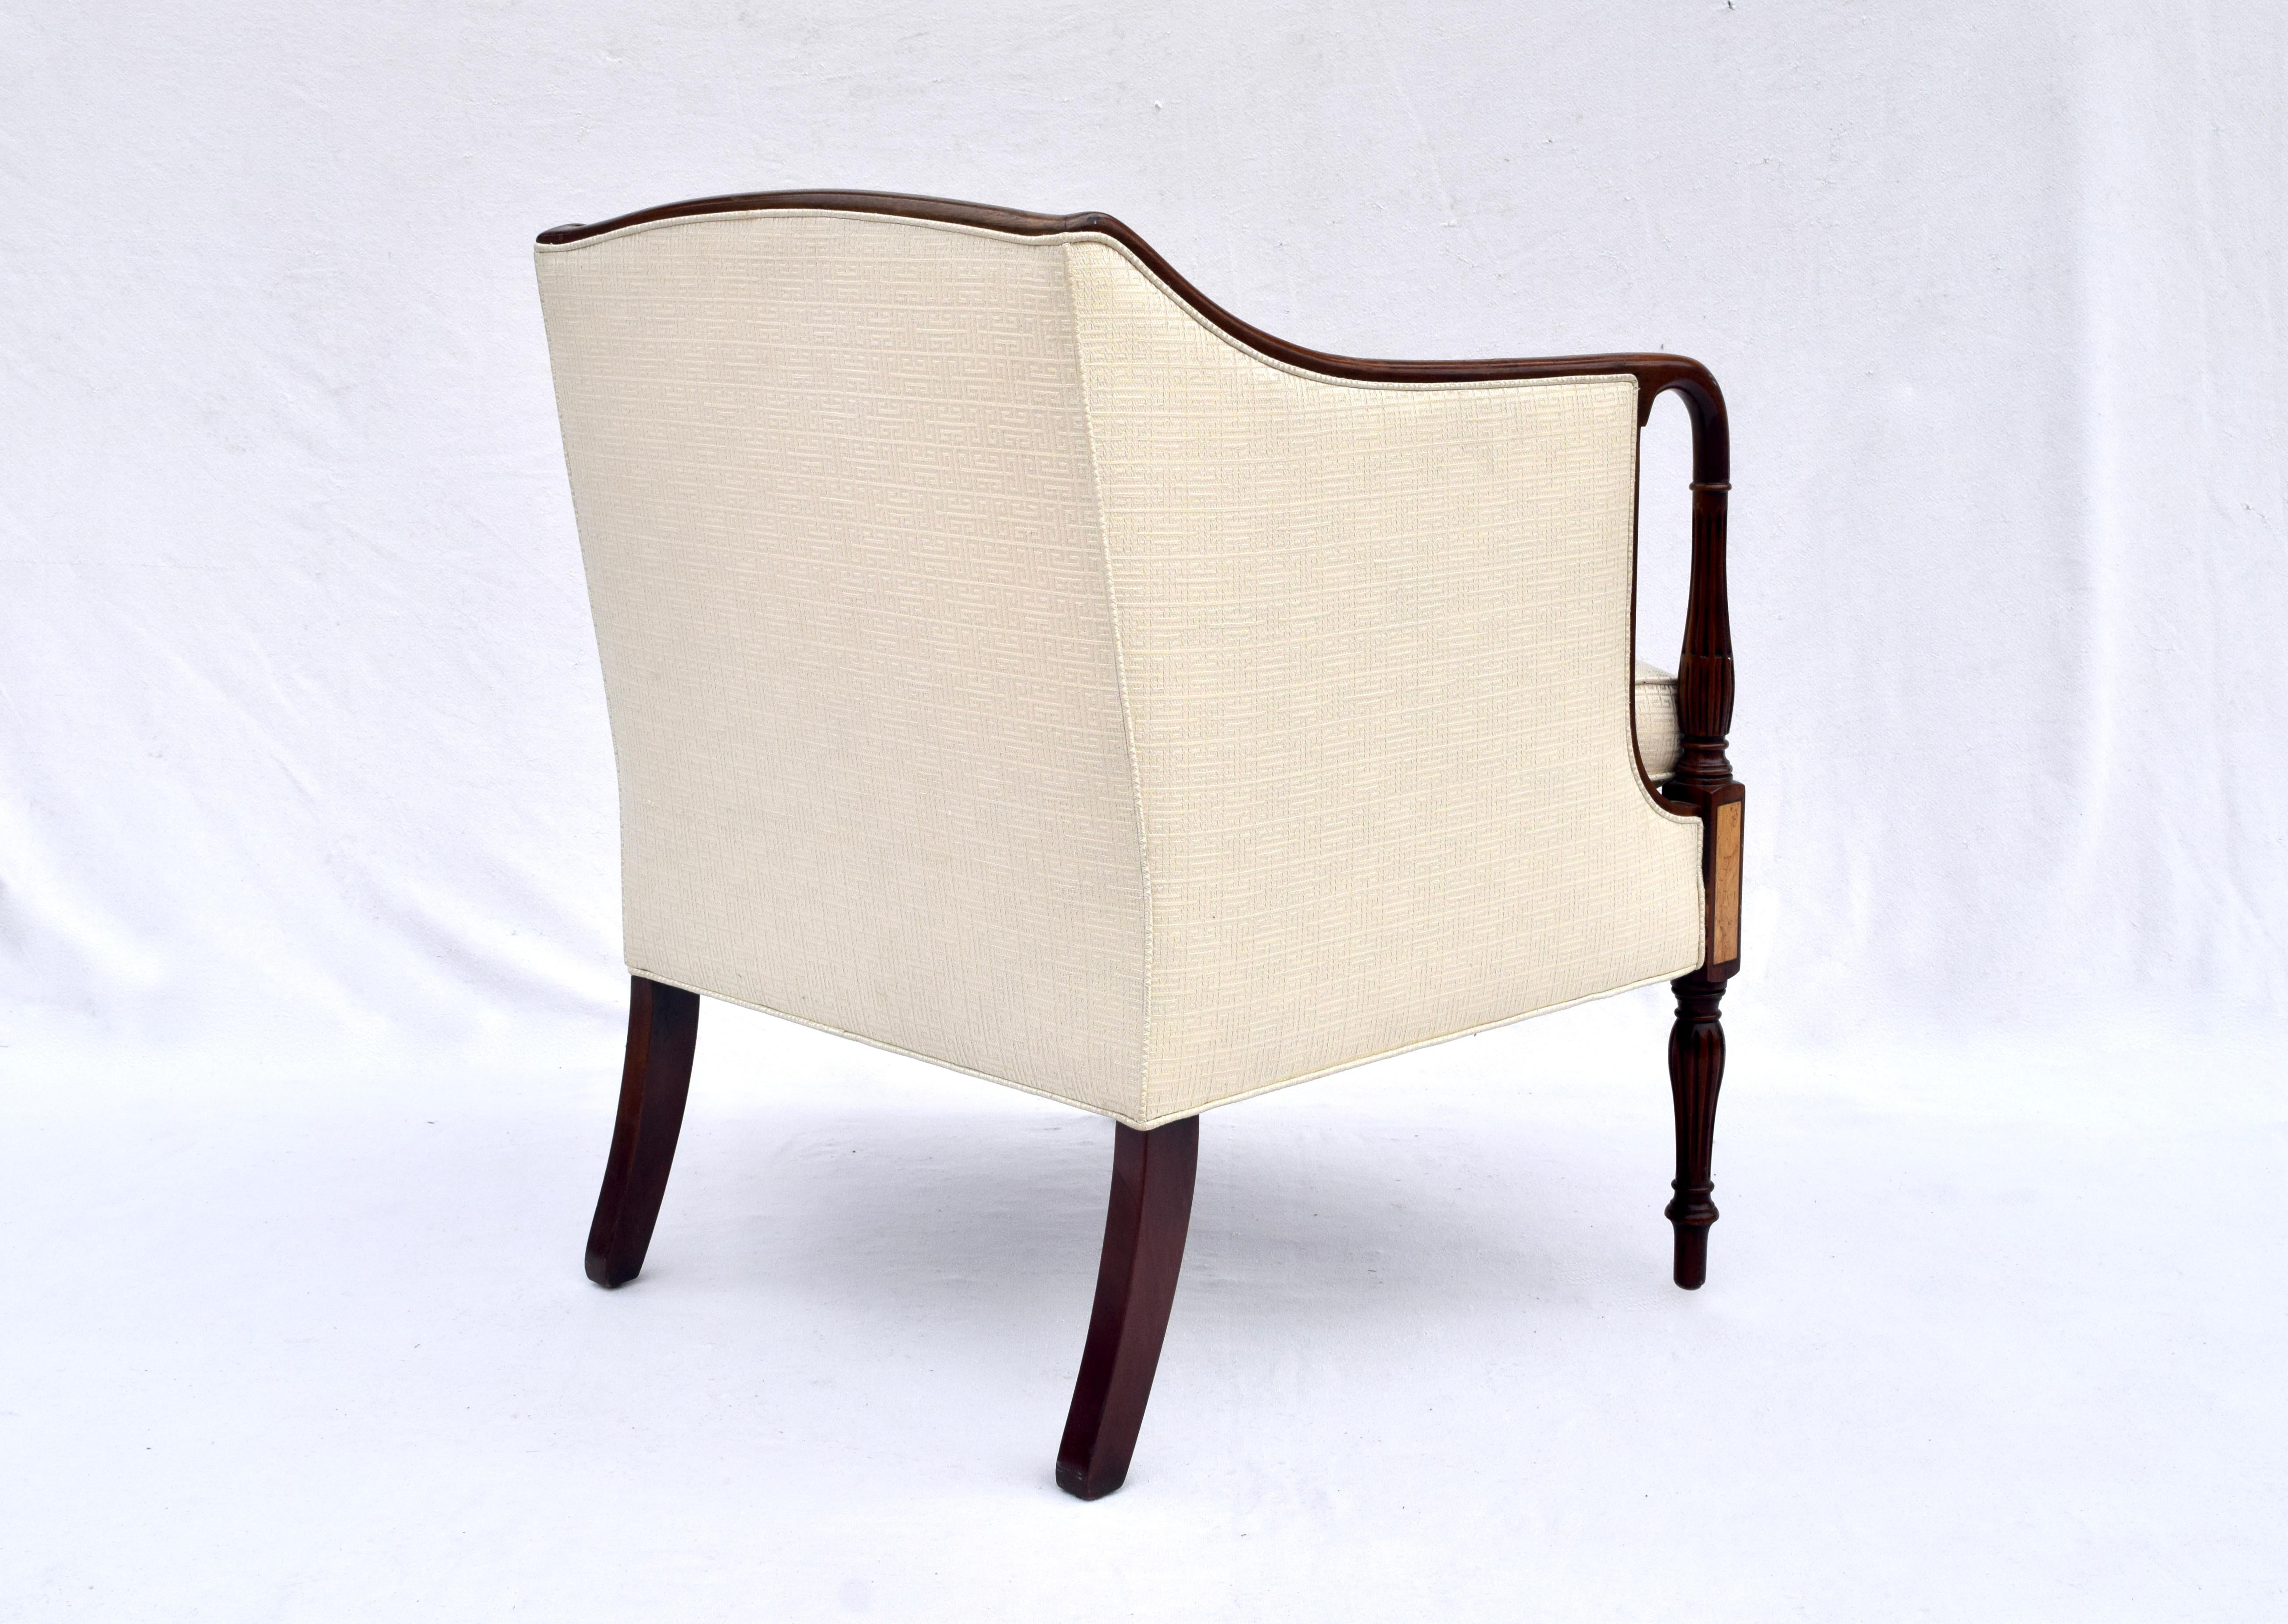 Upholstery Sheraton Federal Style Upholstered Inlaid Club Chairs by Southwood Hickory, NC